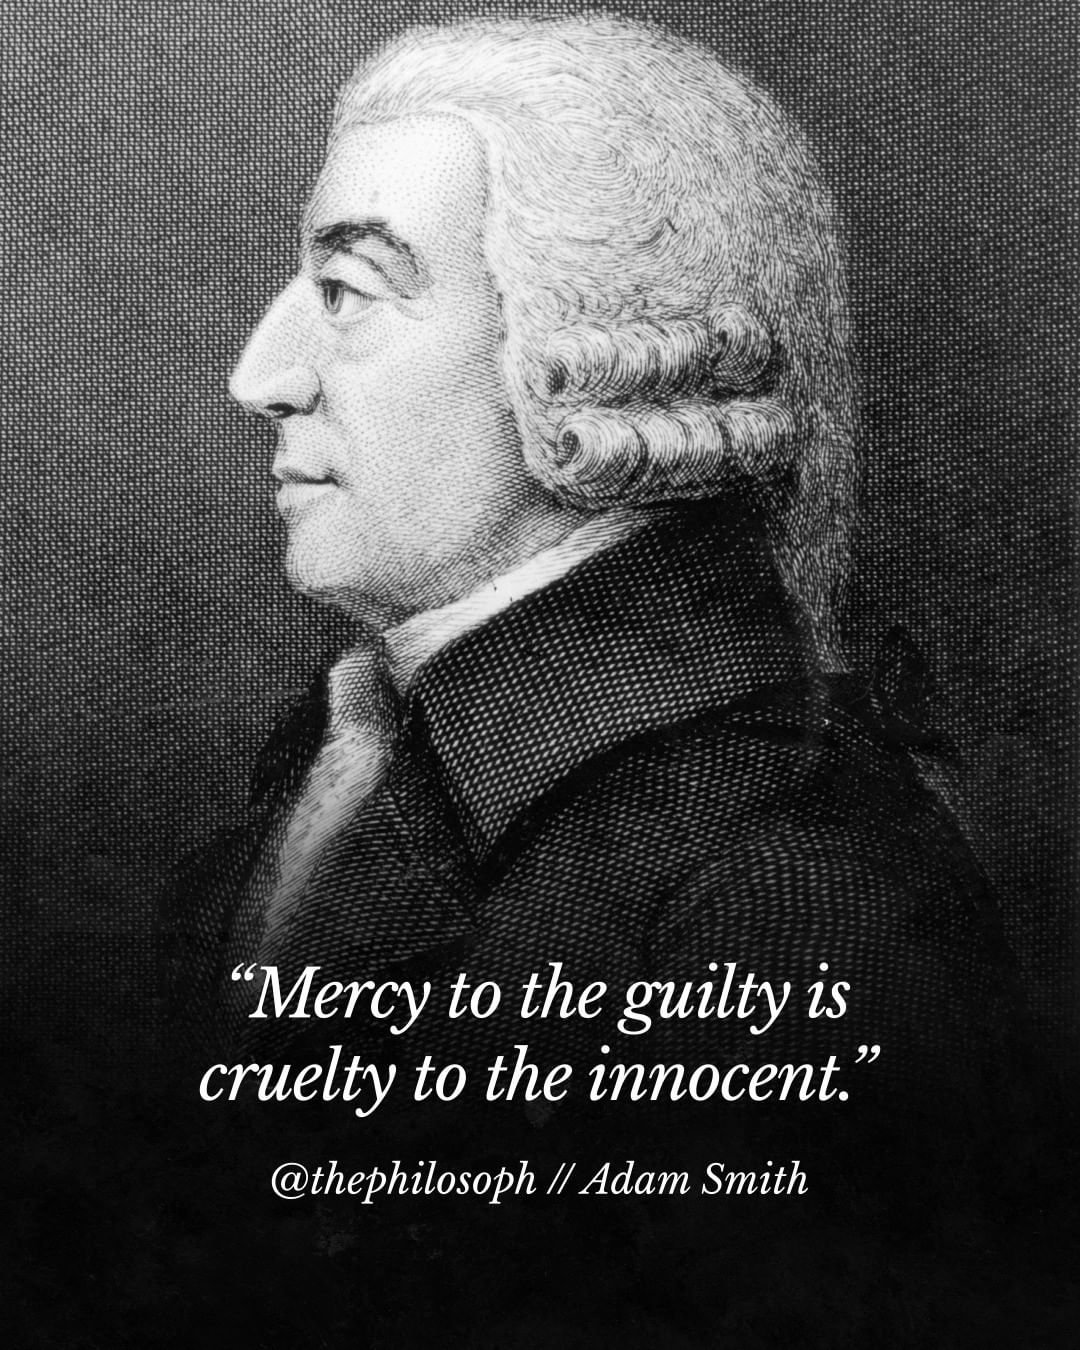 Mercy to the guilty is cruelty to the innocent.- Adam Smith